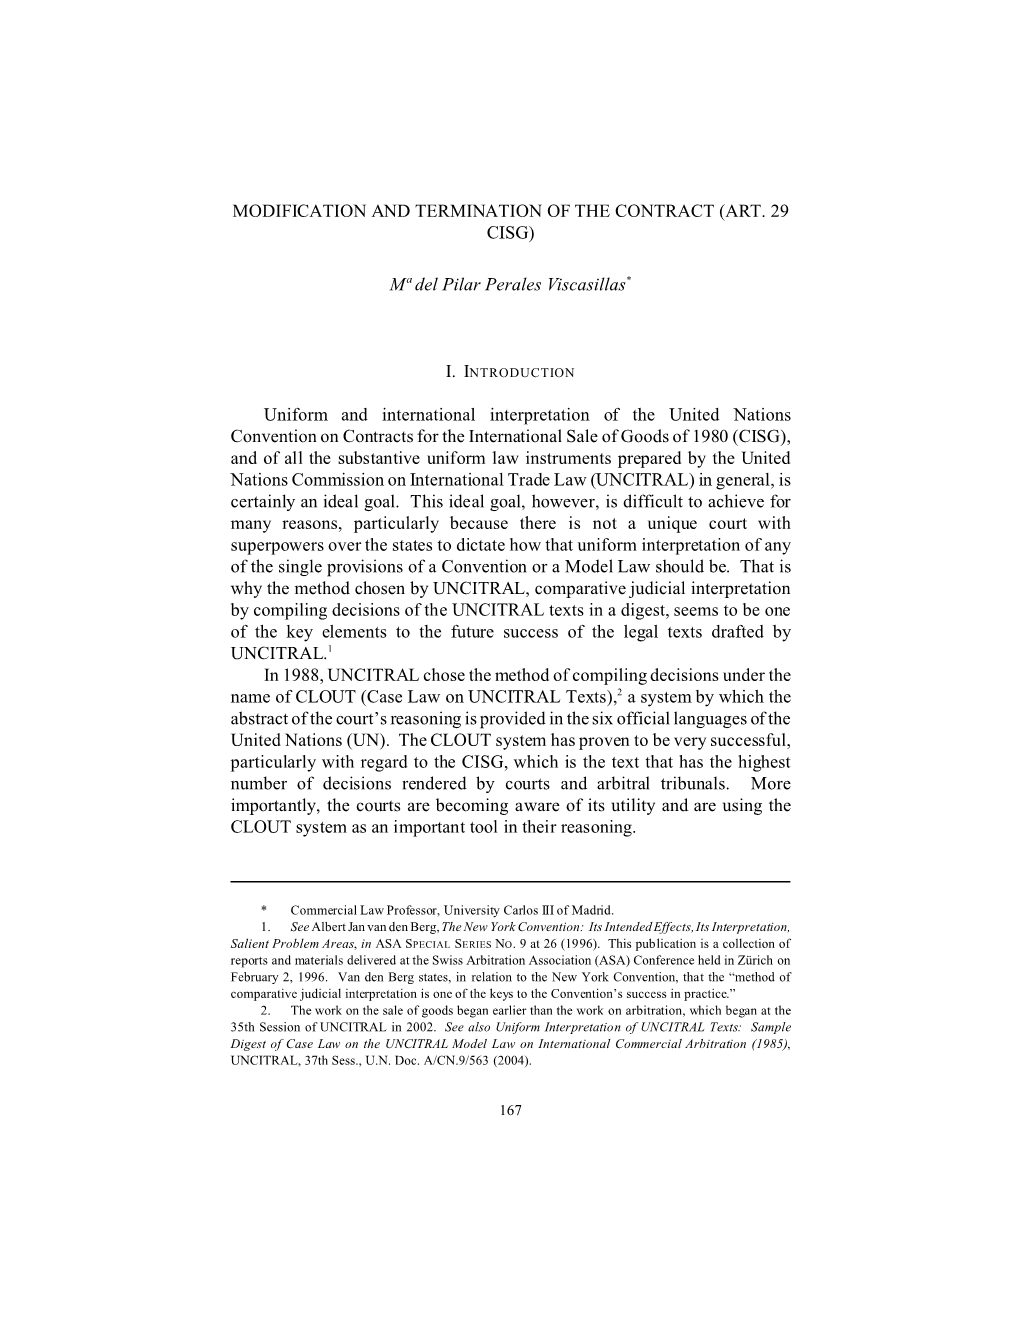 Modification and Termination of the Contract (Art. 29 Cisg)